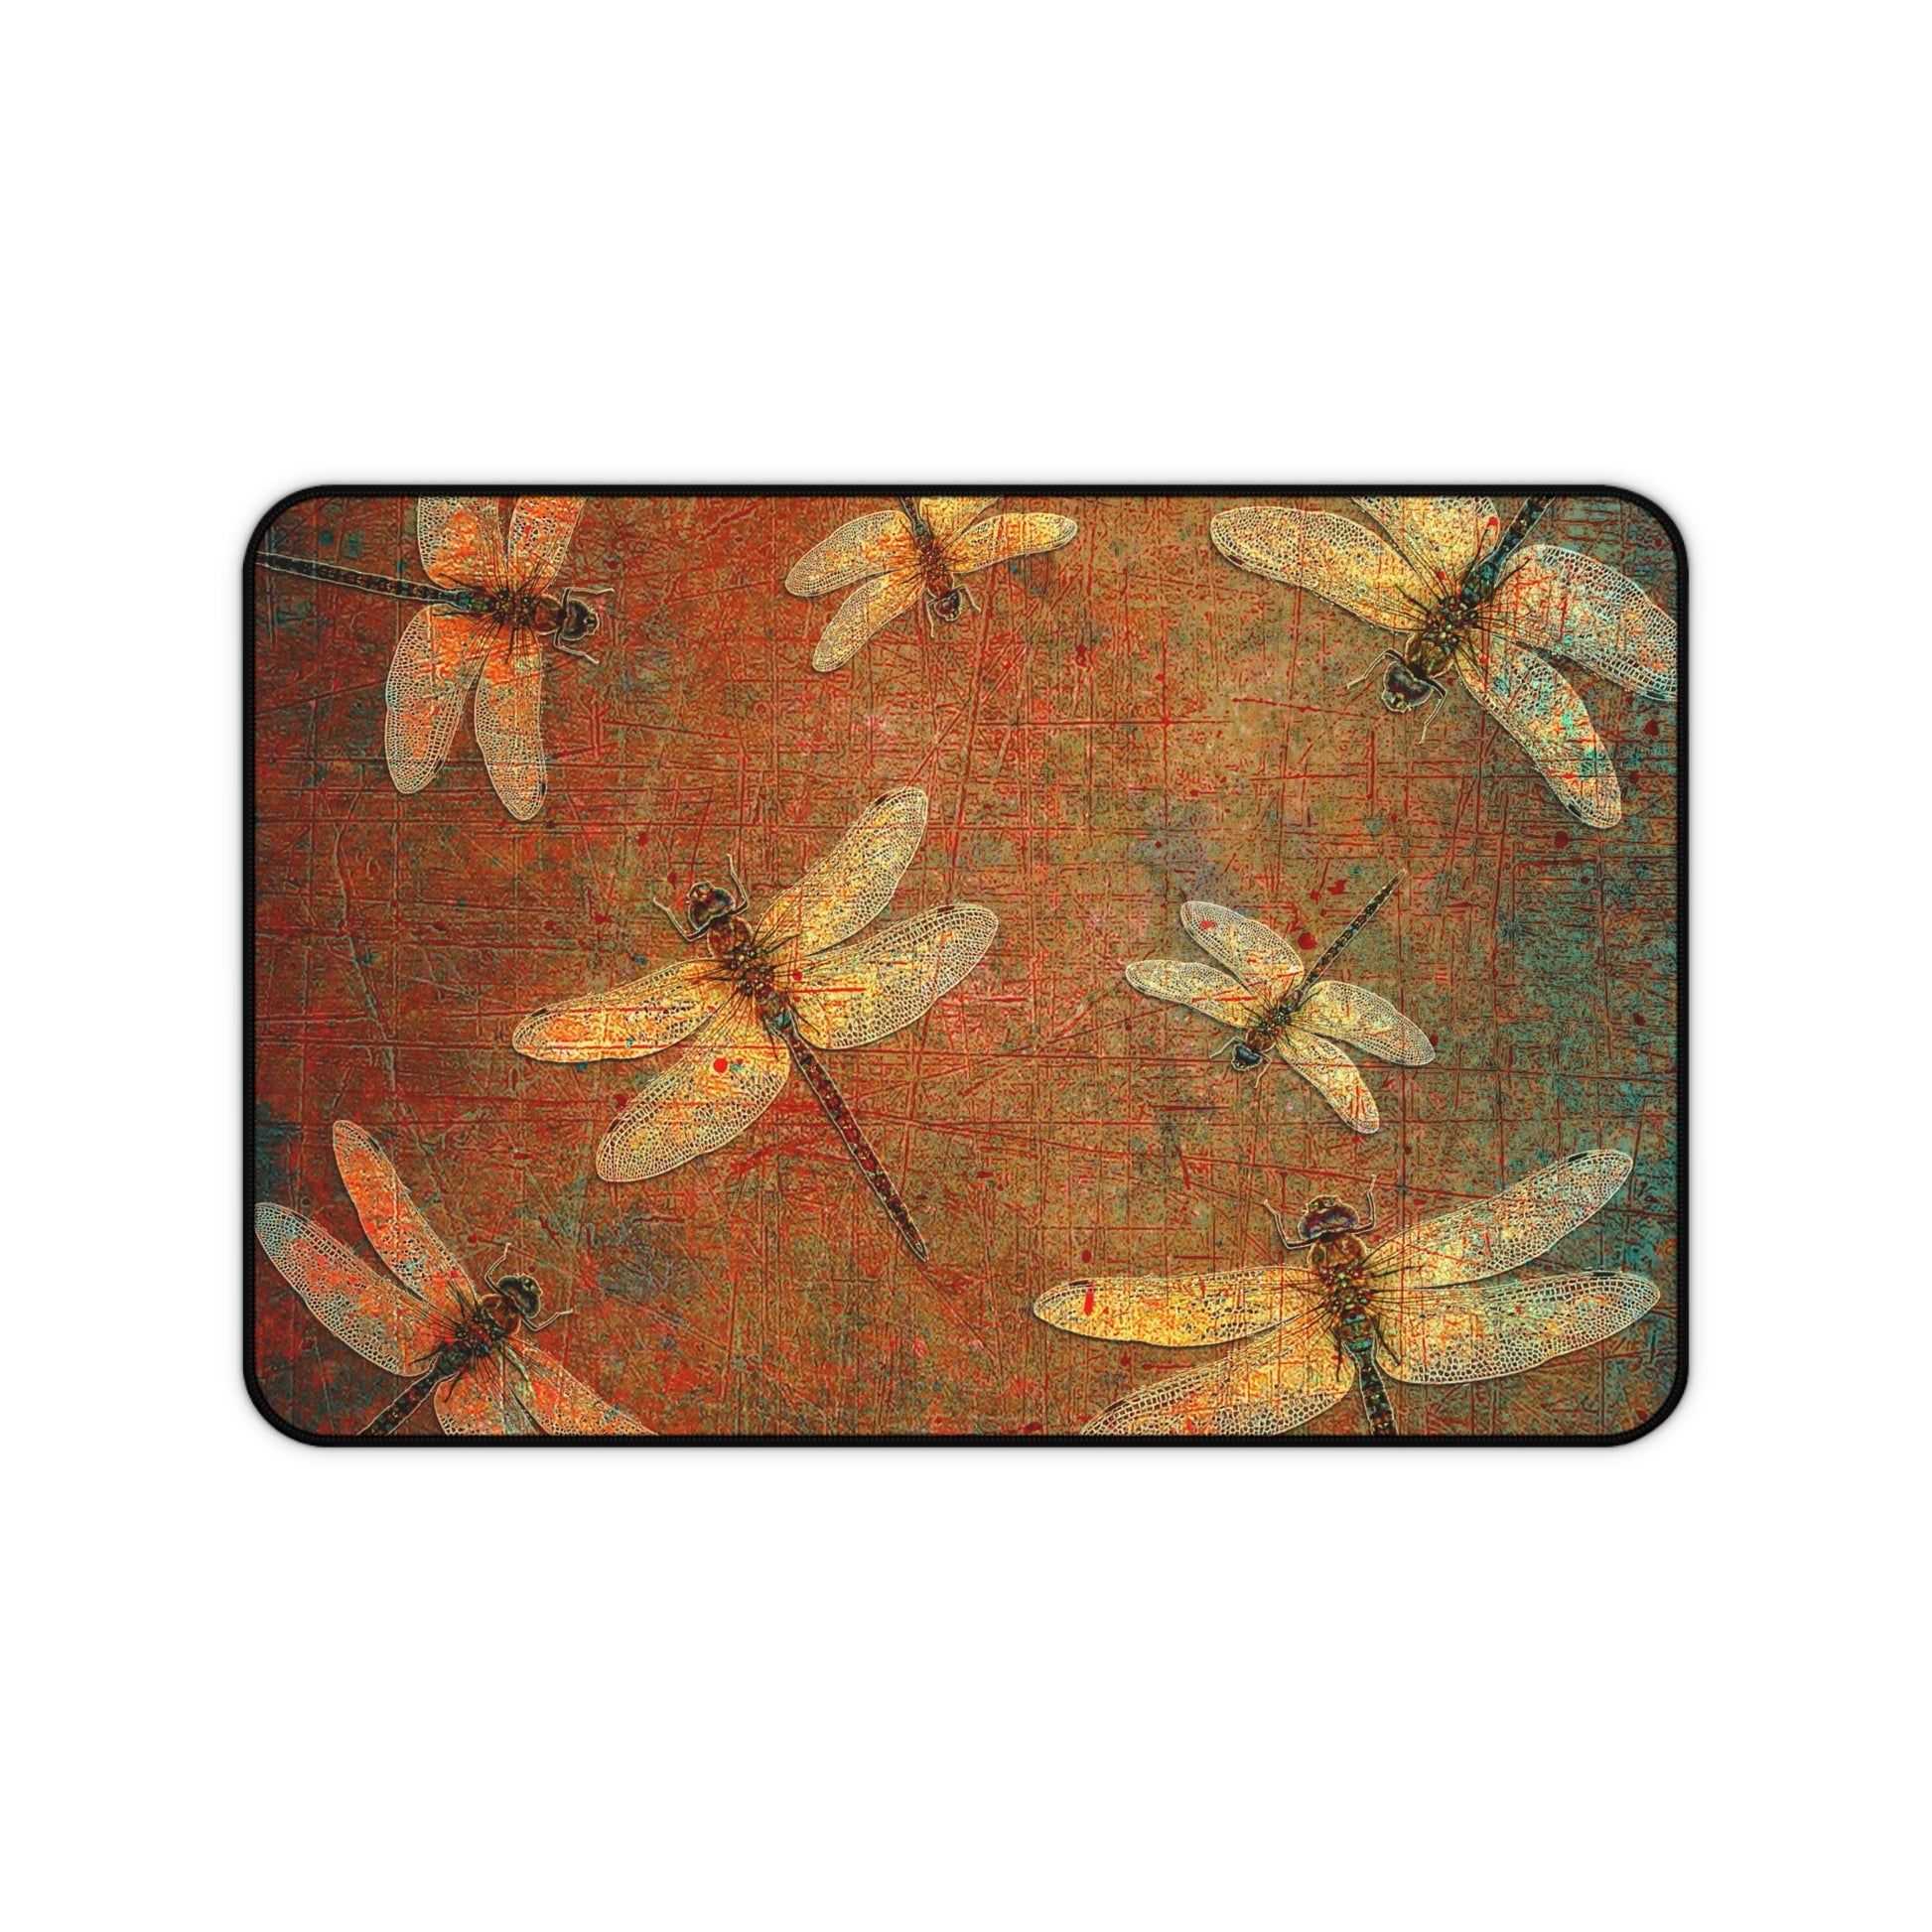 Dragonfly Desk Mat - Flight of Dragonflies on Brown and Orange Background 12x18